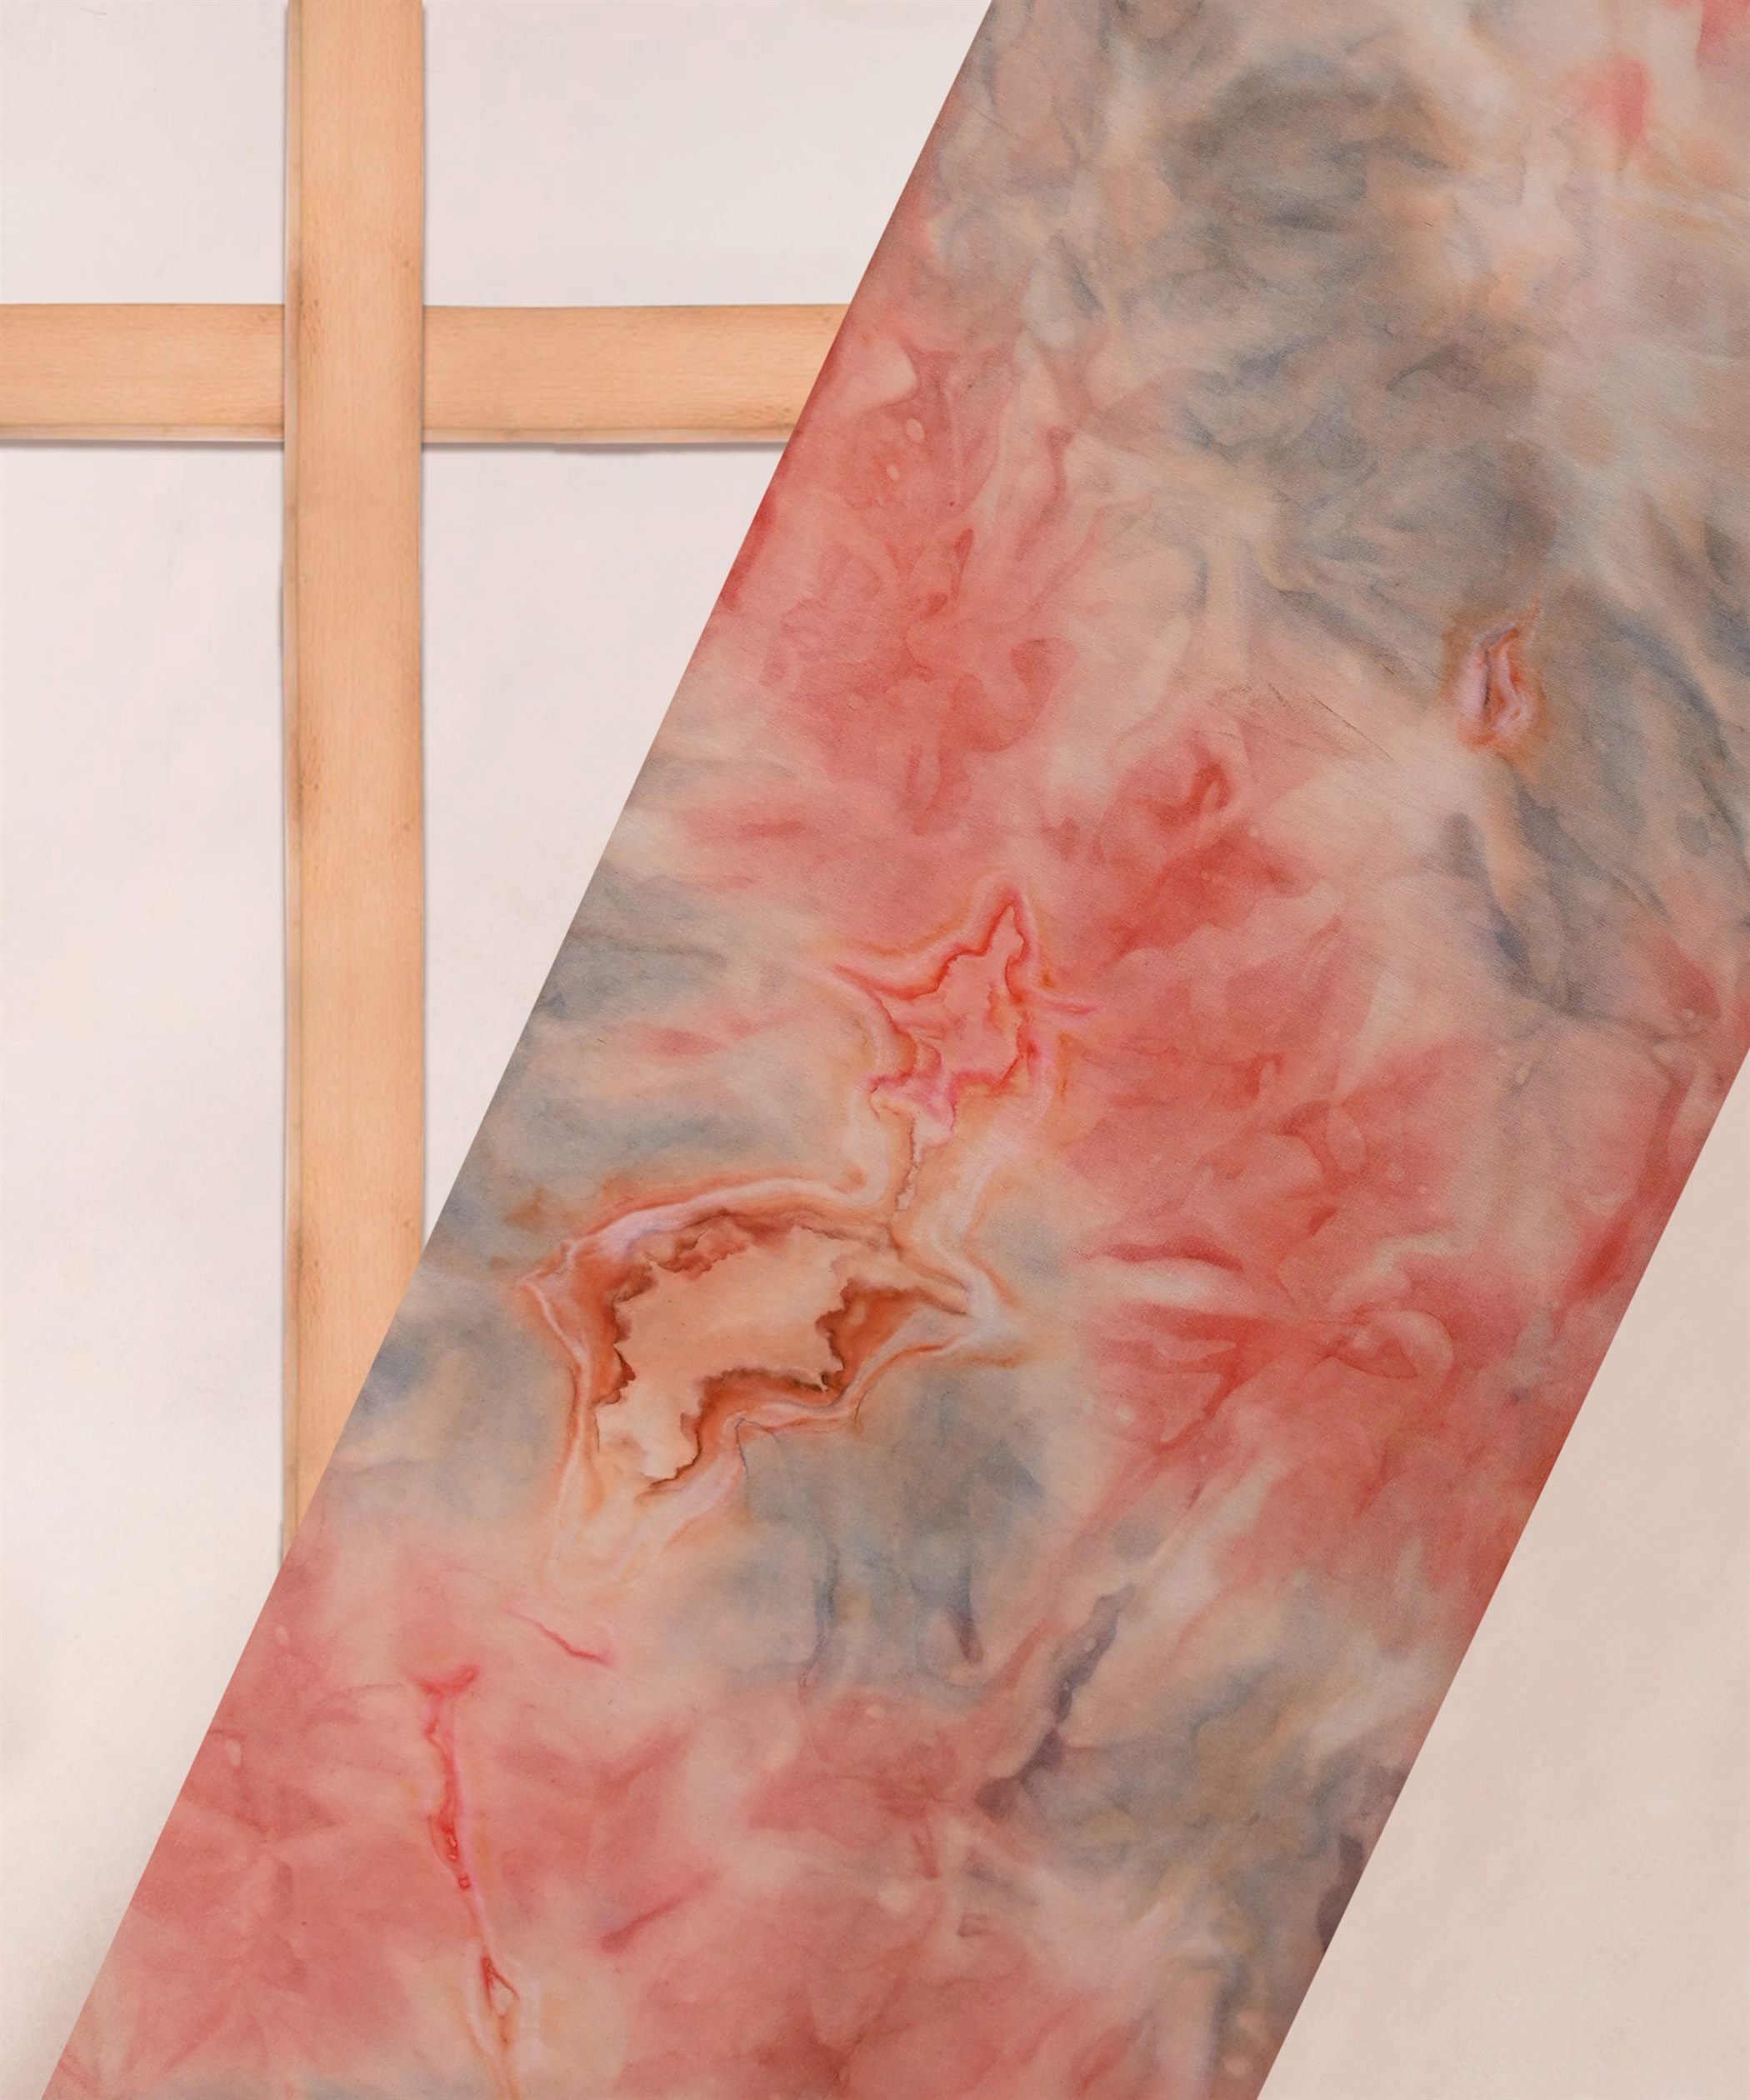 SATIN-WITH-COLORED-TIE-AND-DYE-LIGHT-RED-FWWF0_JPG.jpg